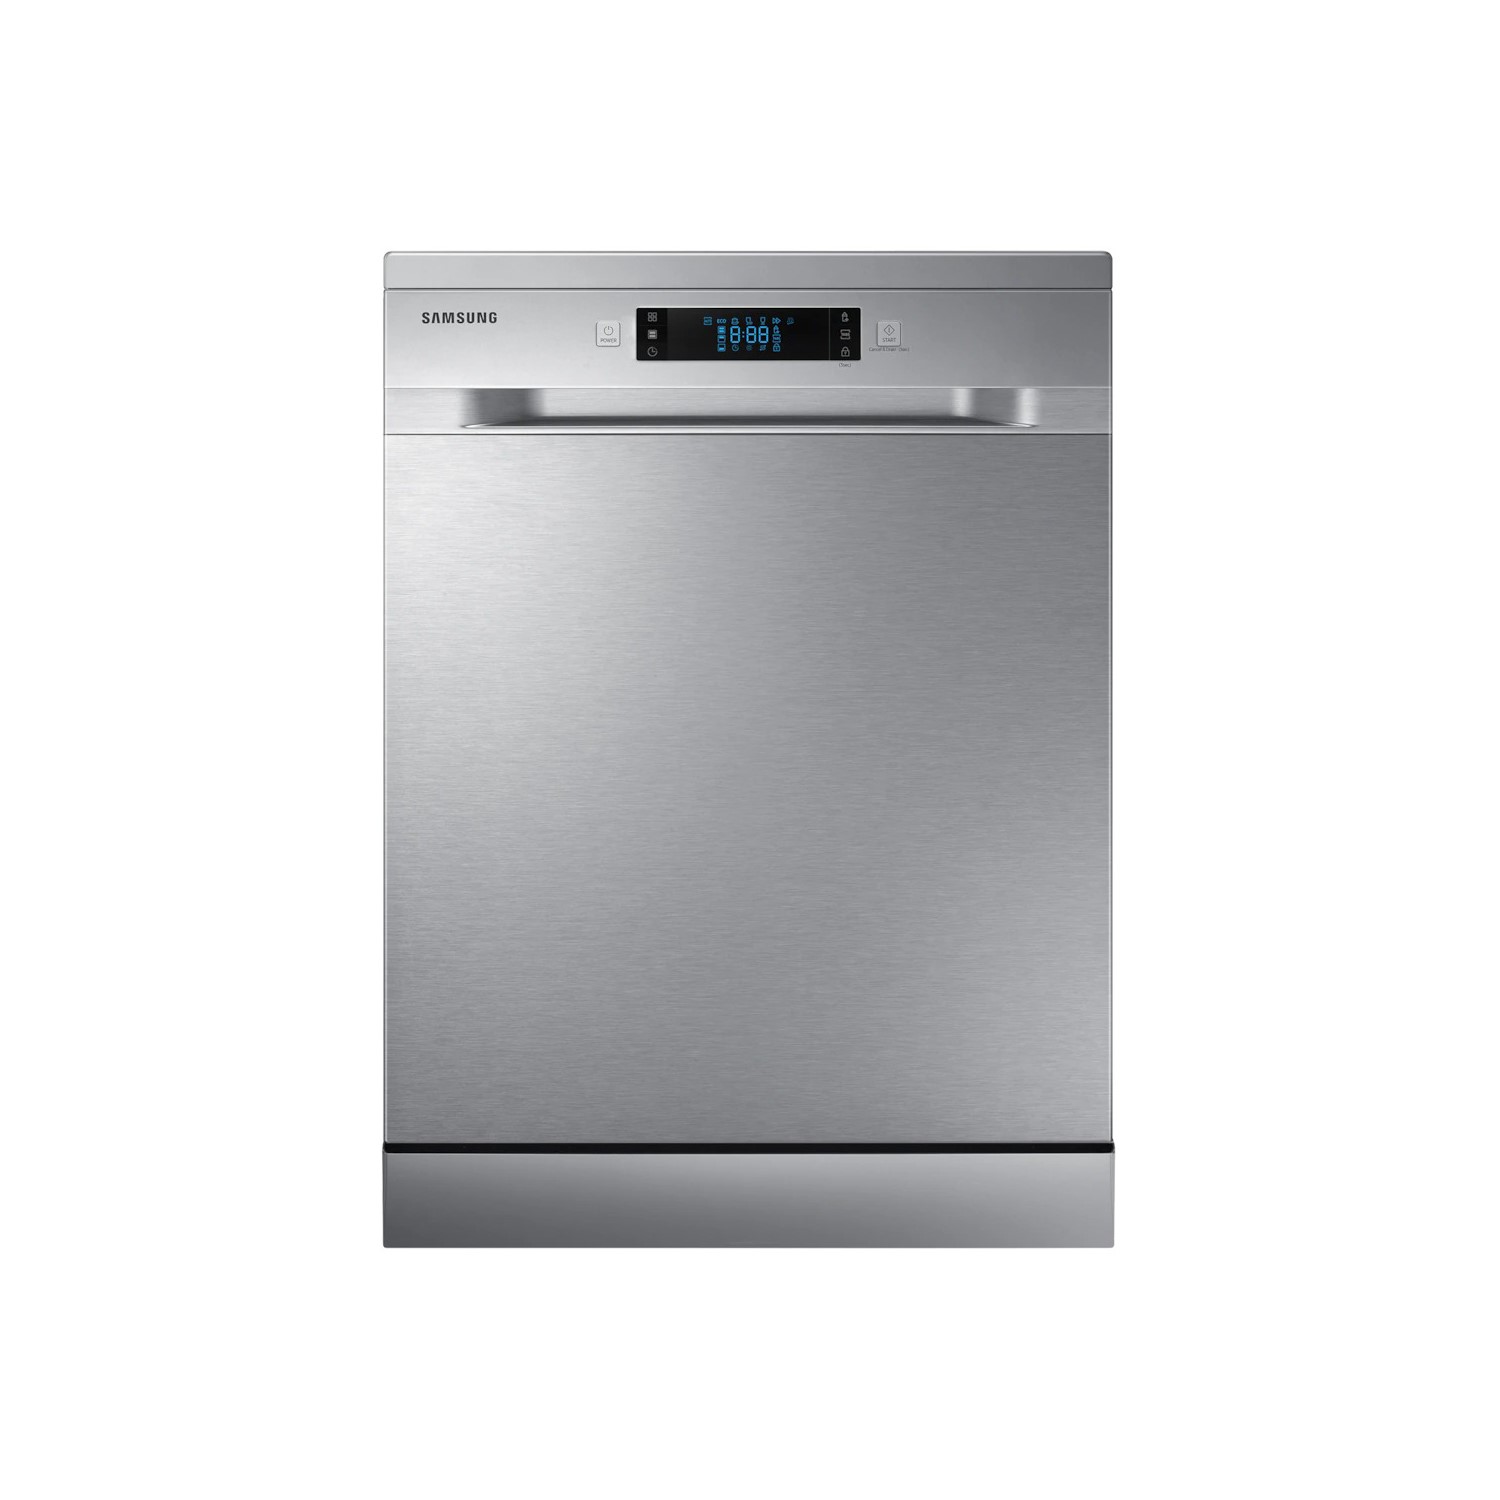 Samsung Series 6 DW60M6050FS Standard Dishwasher - Stainless Steel - E Rated